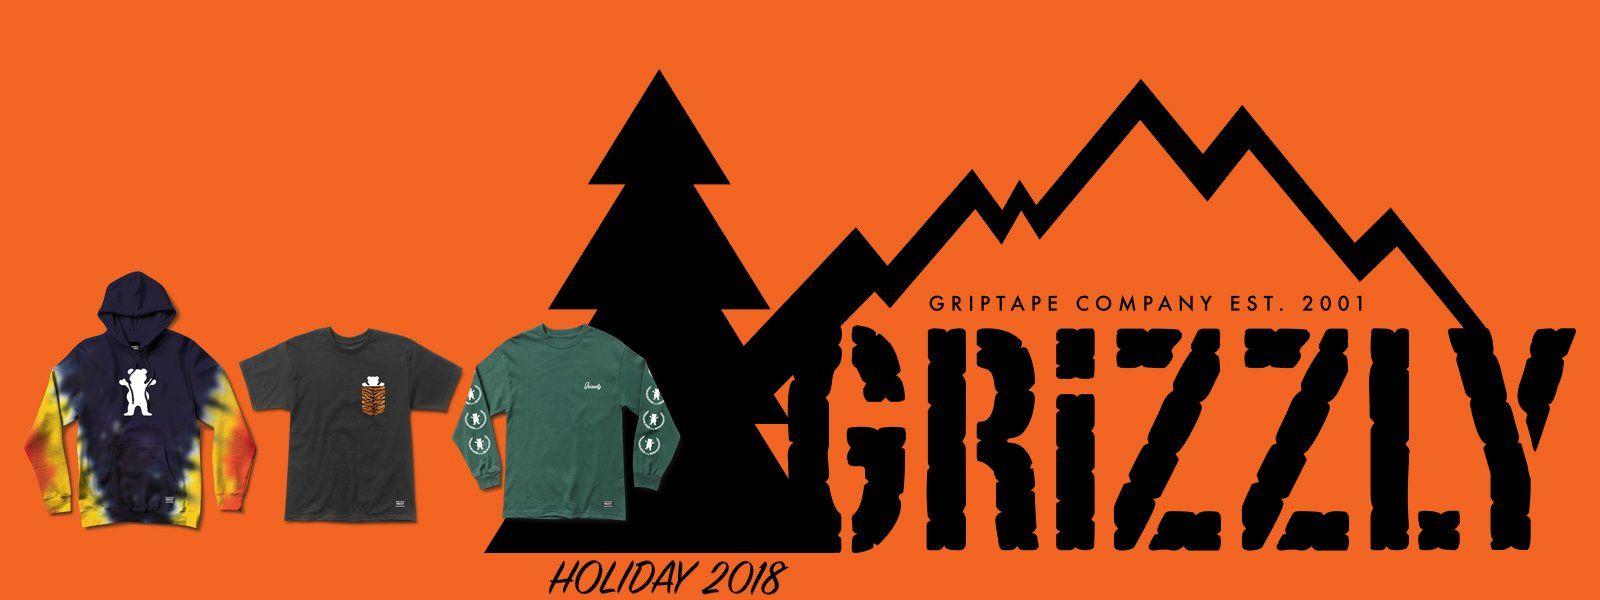 Crazy Grizzly Grip Logo - Grizzly Griptape